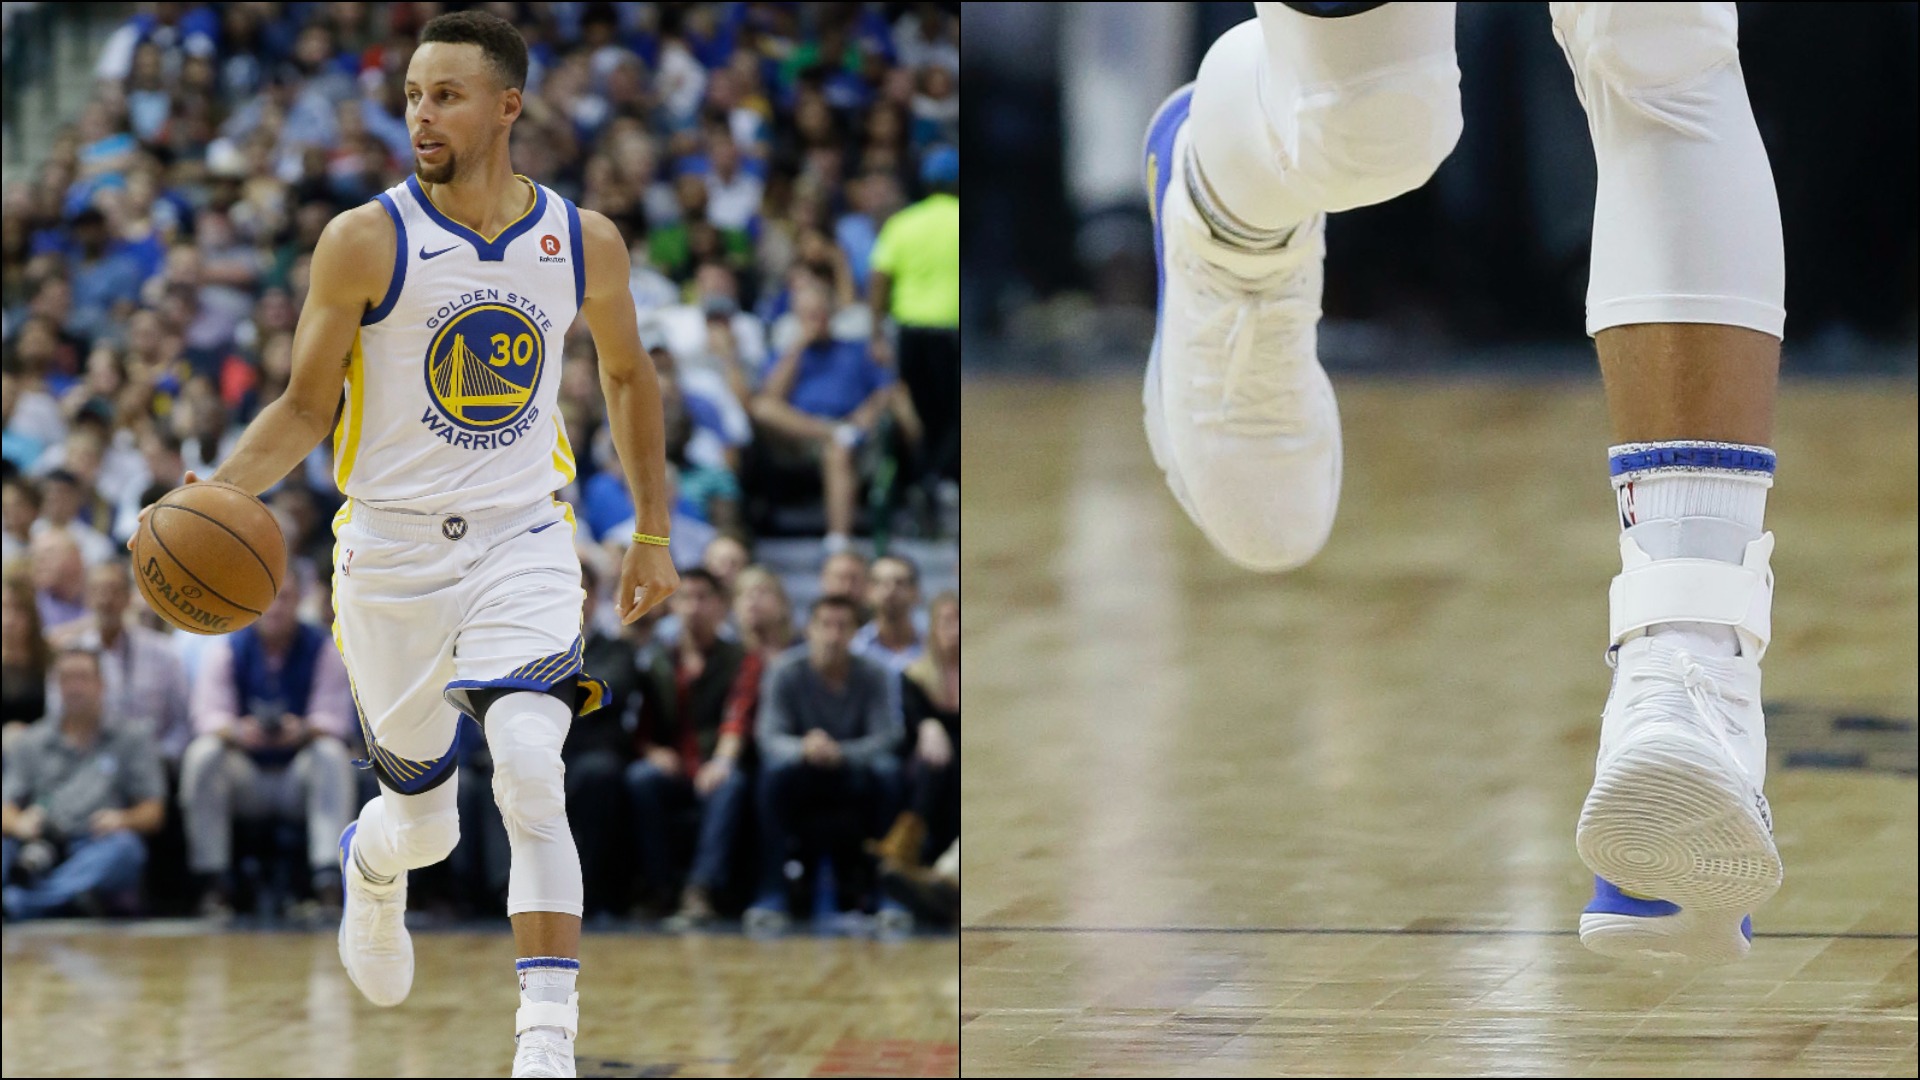 Are James Harden and Steph Curry hiding the Nike logos on their socks?